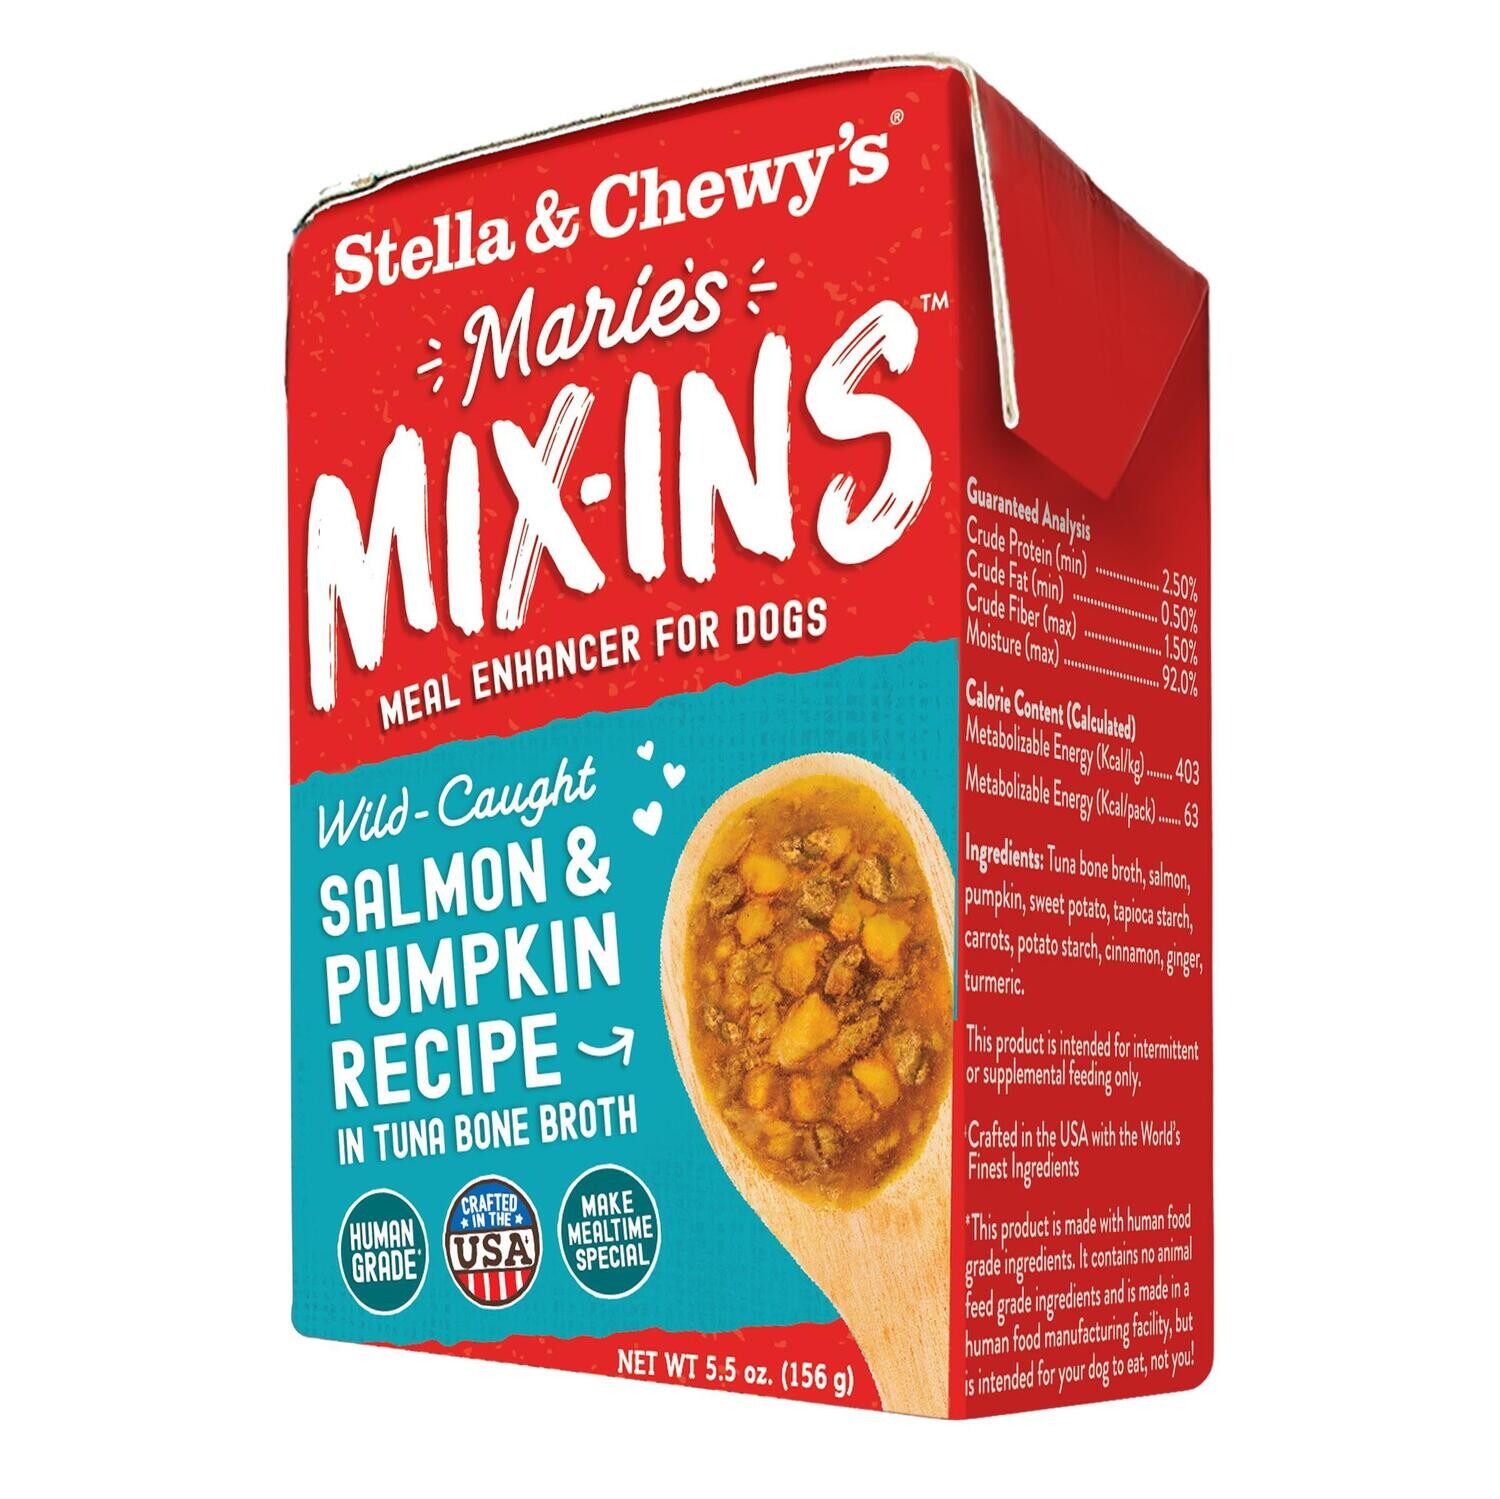 Stella & Chewy's Marie's Mix-Ins Salmon & Pumpkin Wet Food for Dog